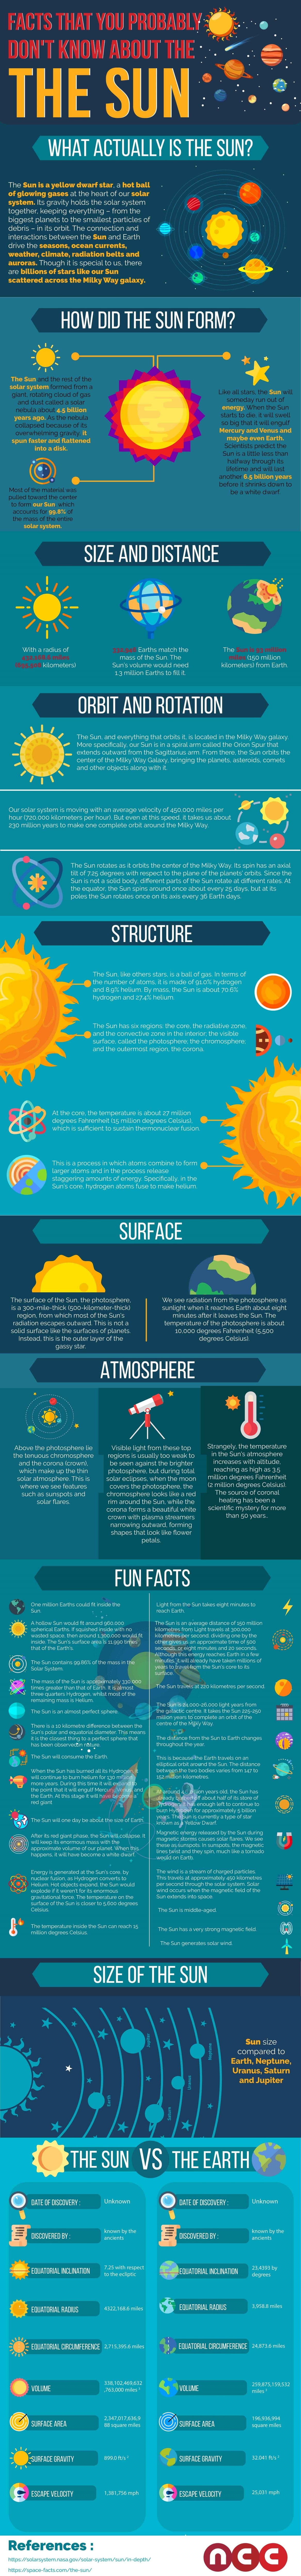 facts about the sun graphic